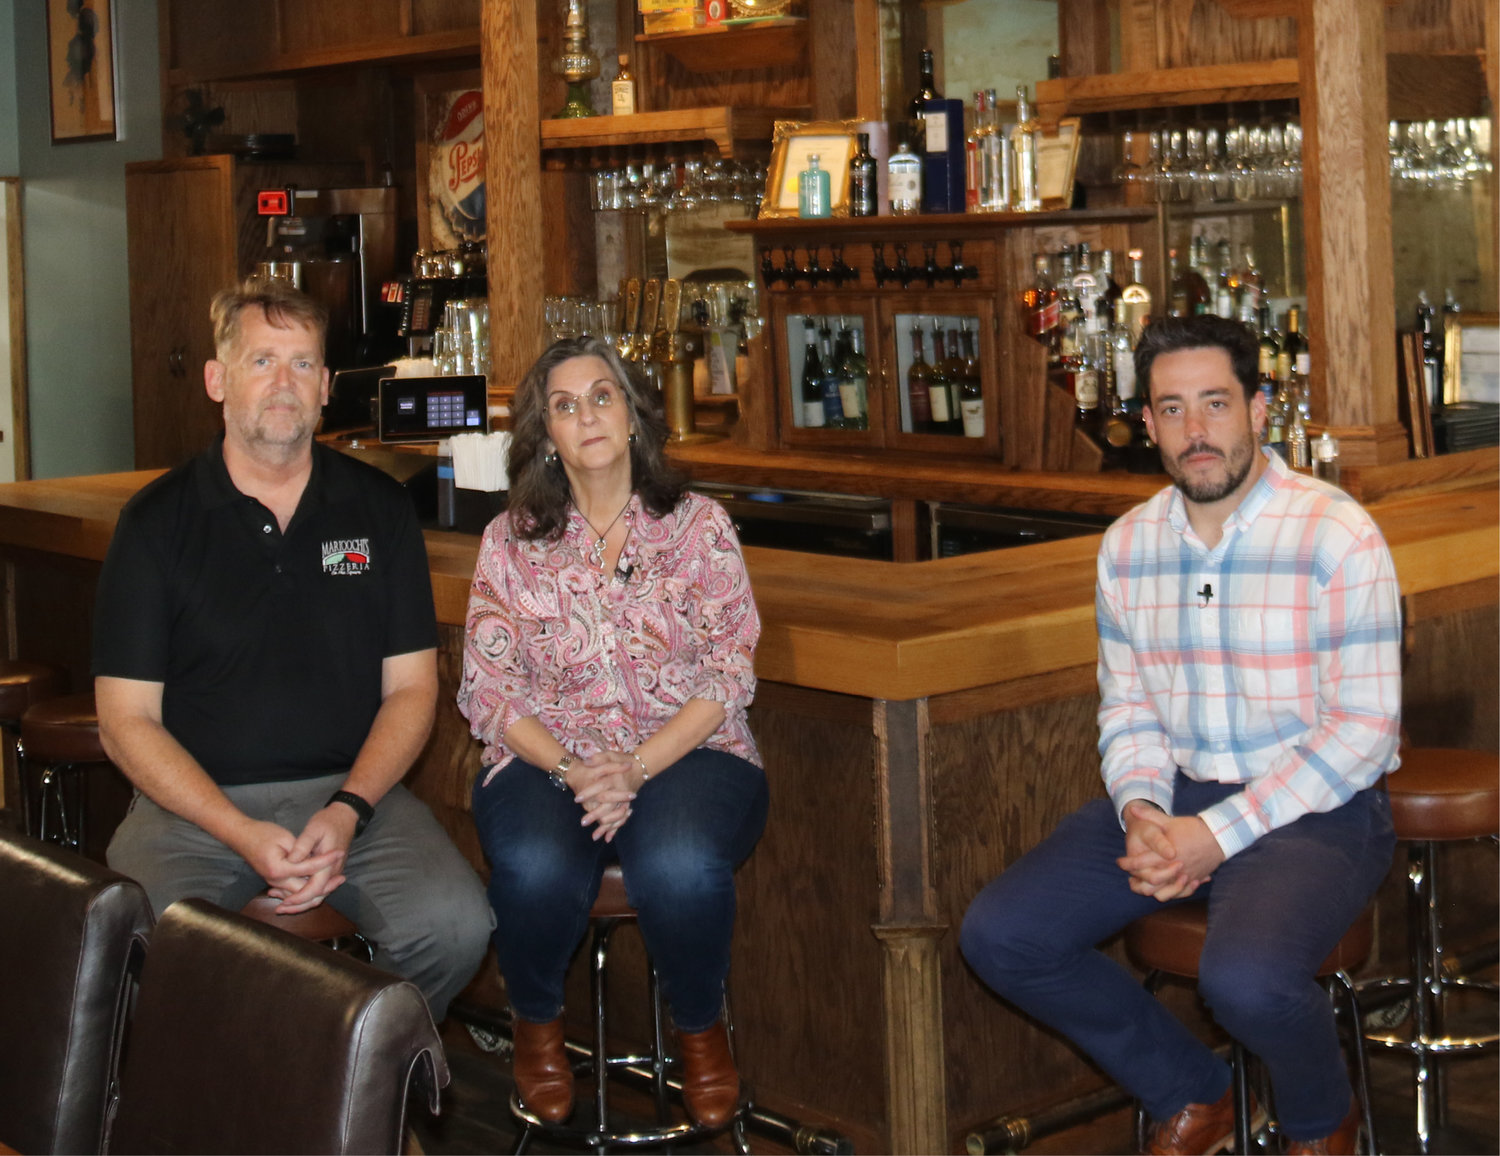 John Rippeberger (left) and Maryangela Ripperberger (center), owners of Marioochi’s Pizzeria, on Liberty Square in Sparta, will be featured in the upcoming segment of “Wish You Were Here!”